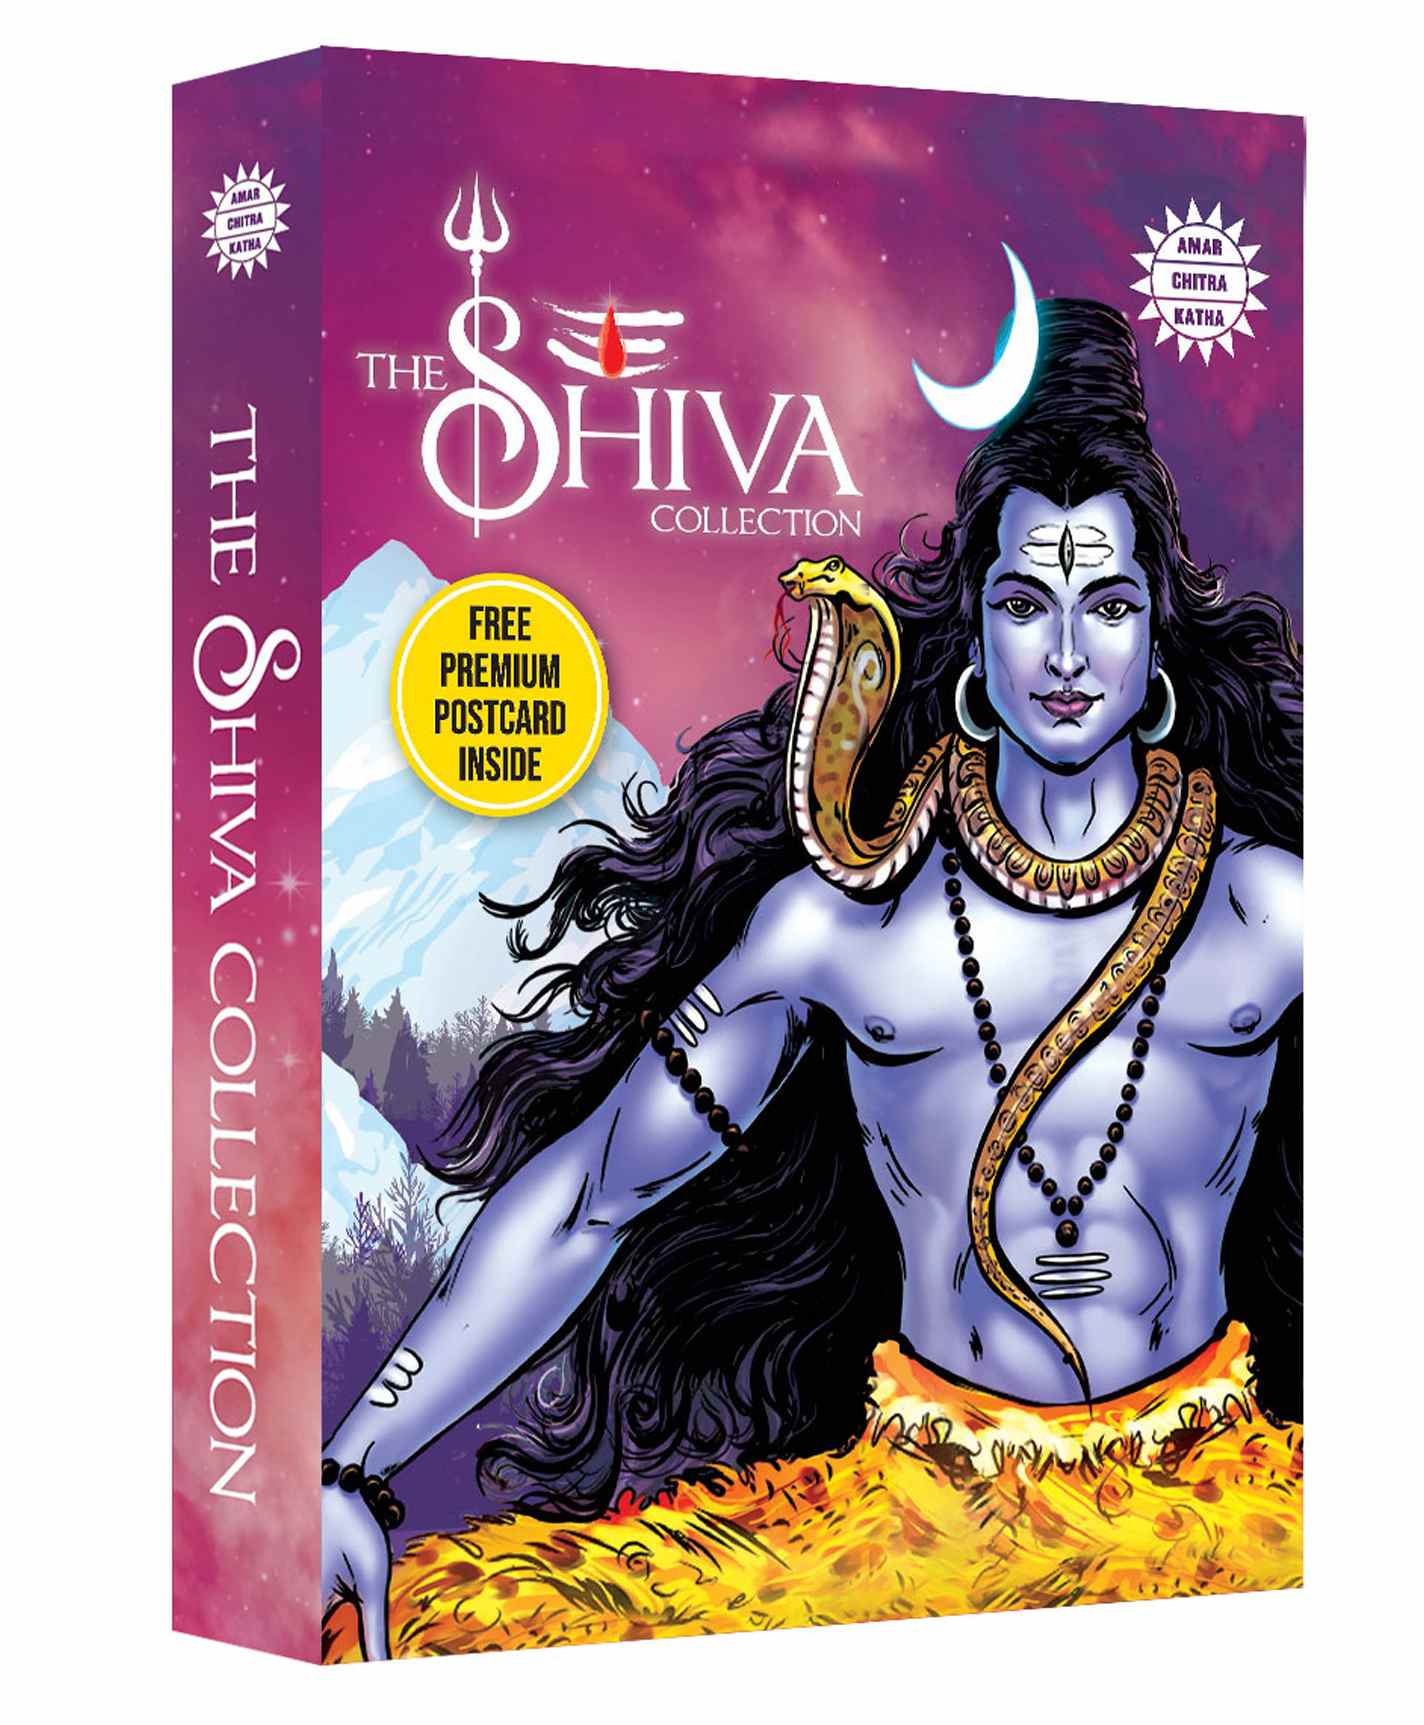 amar chitra katha complete collection pdf free